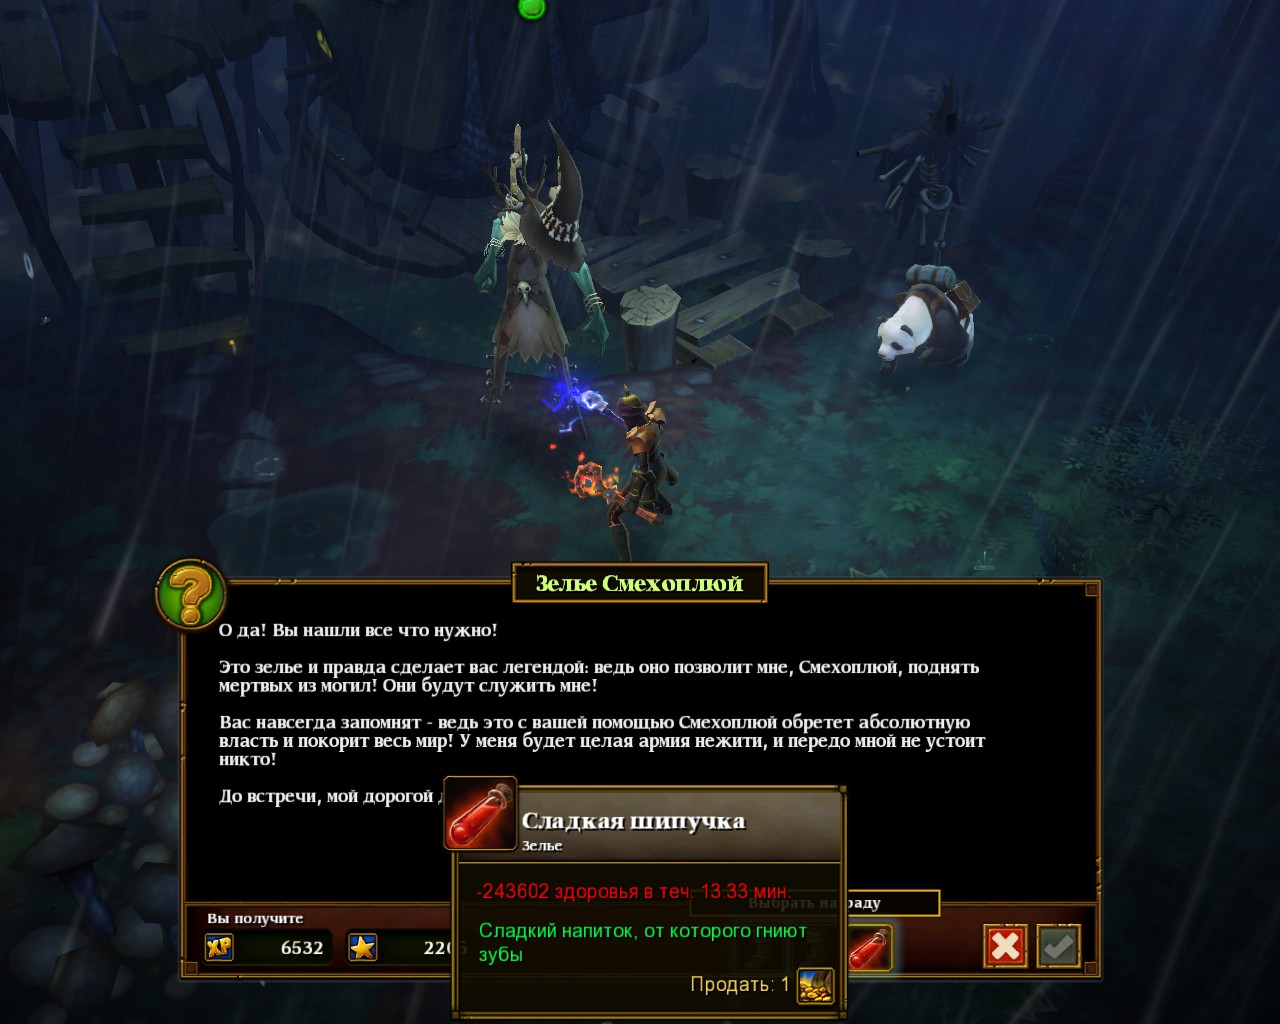 torchlight 2 synergies guide